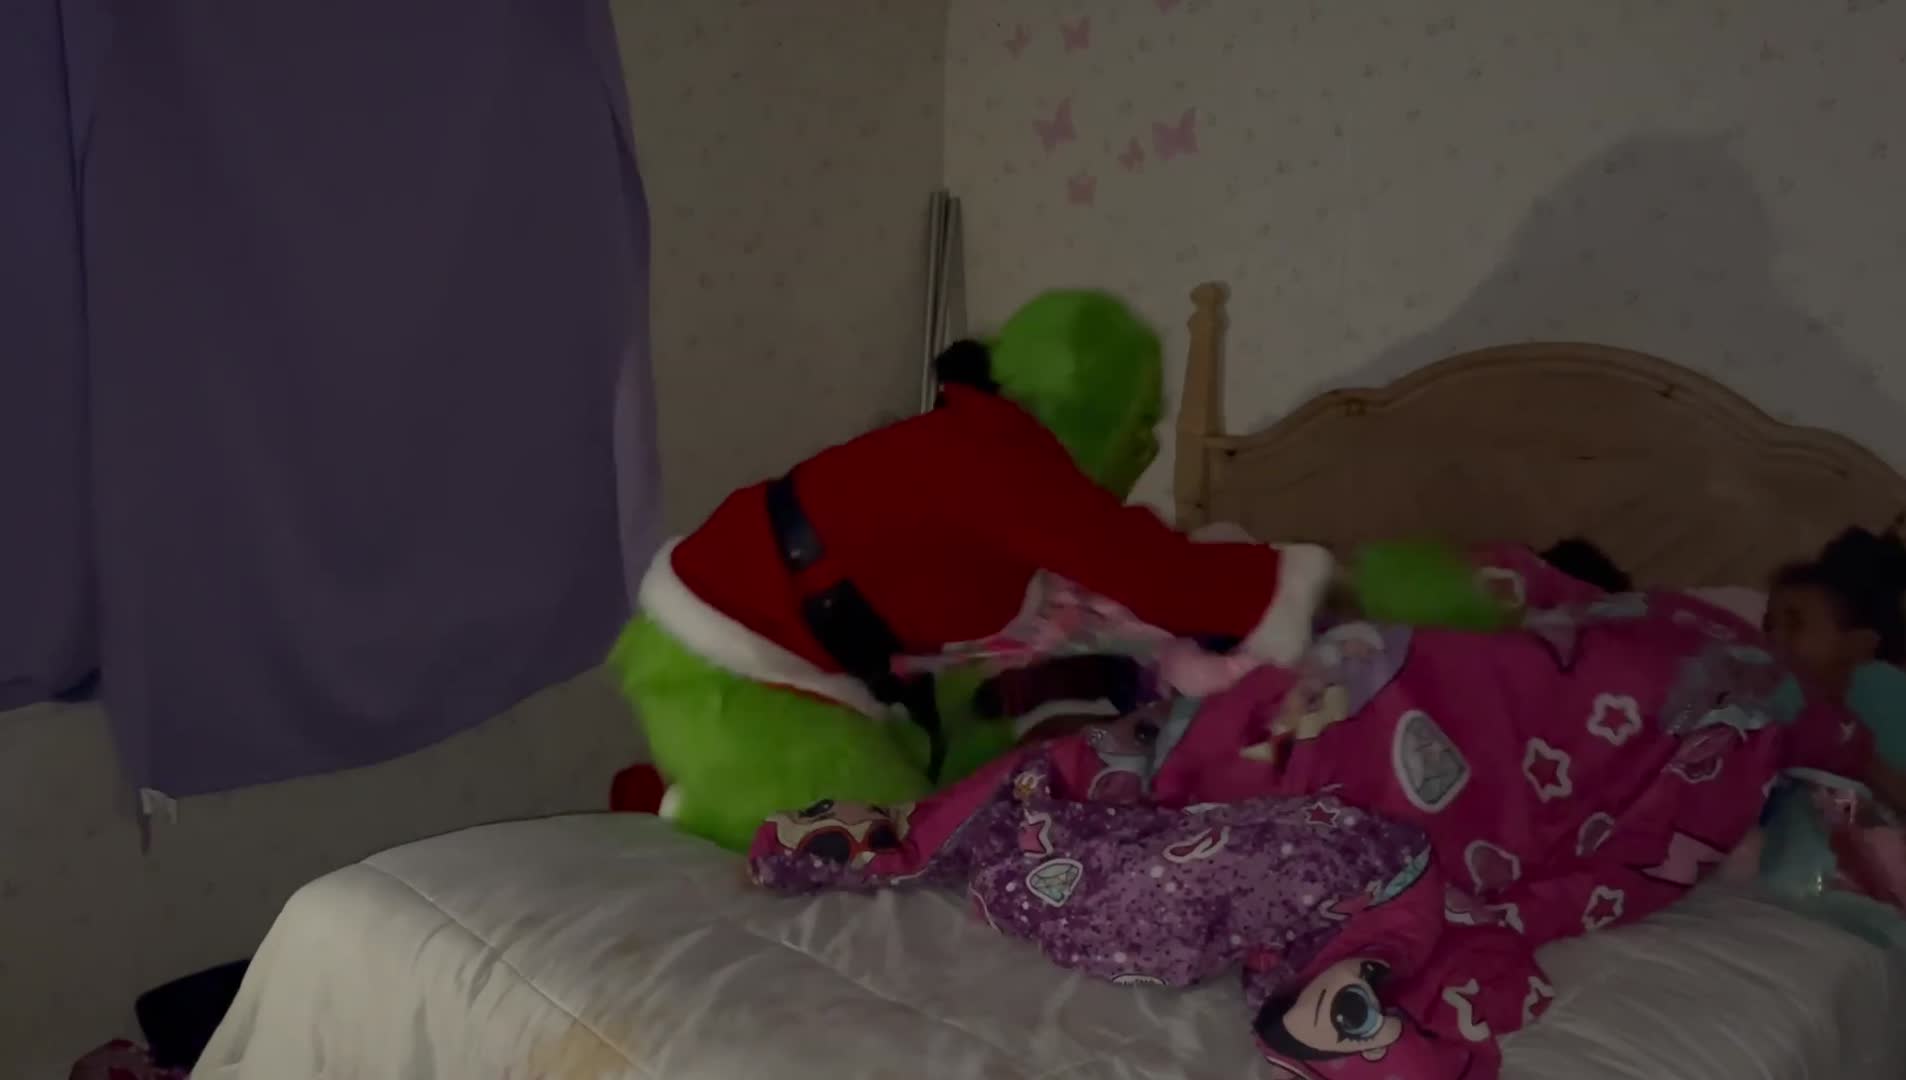 The Grinch scares kids